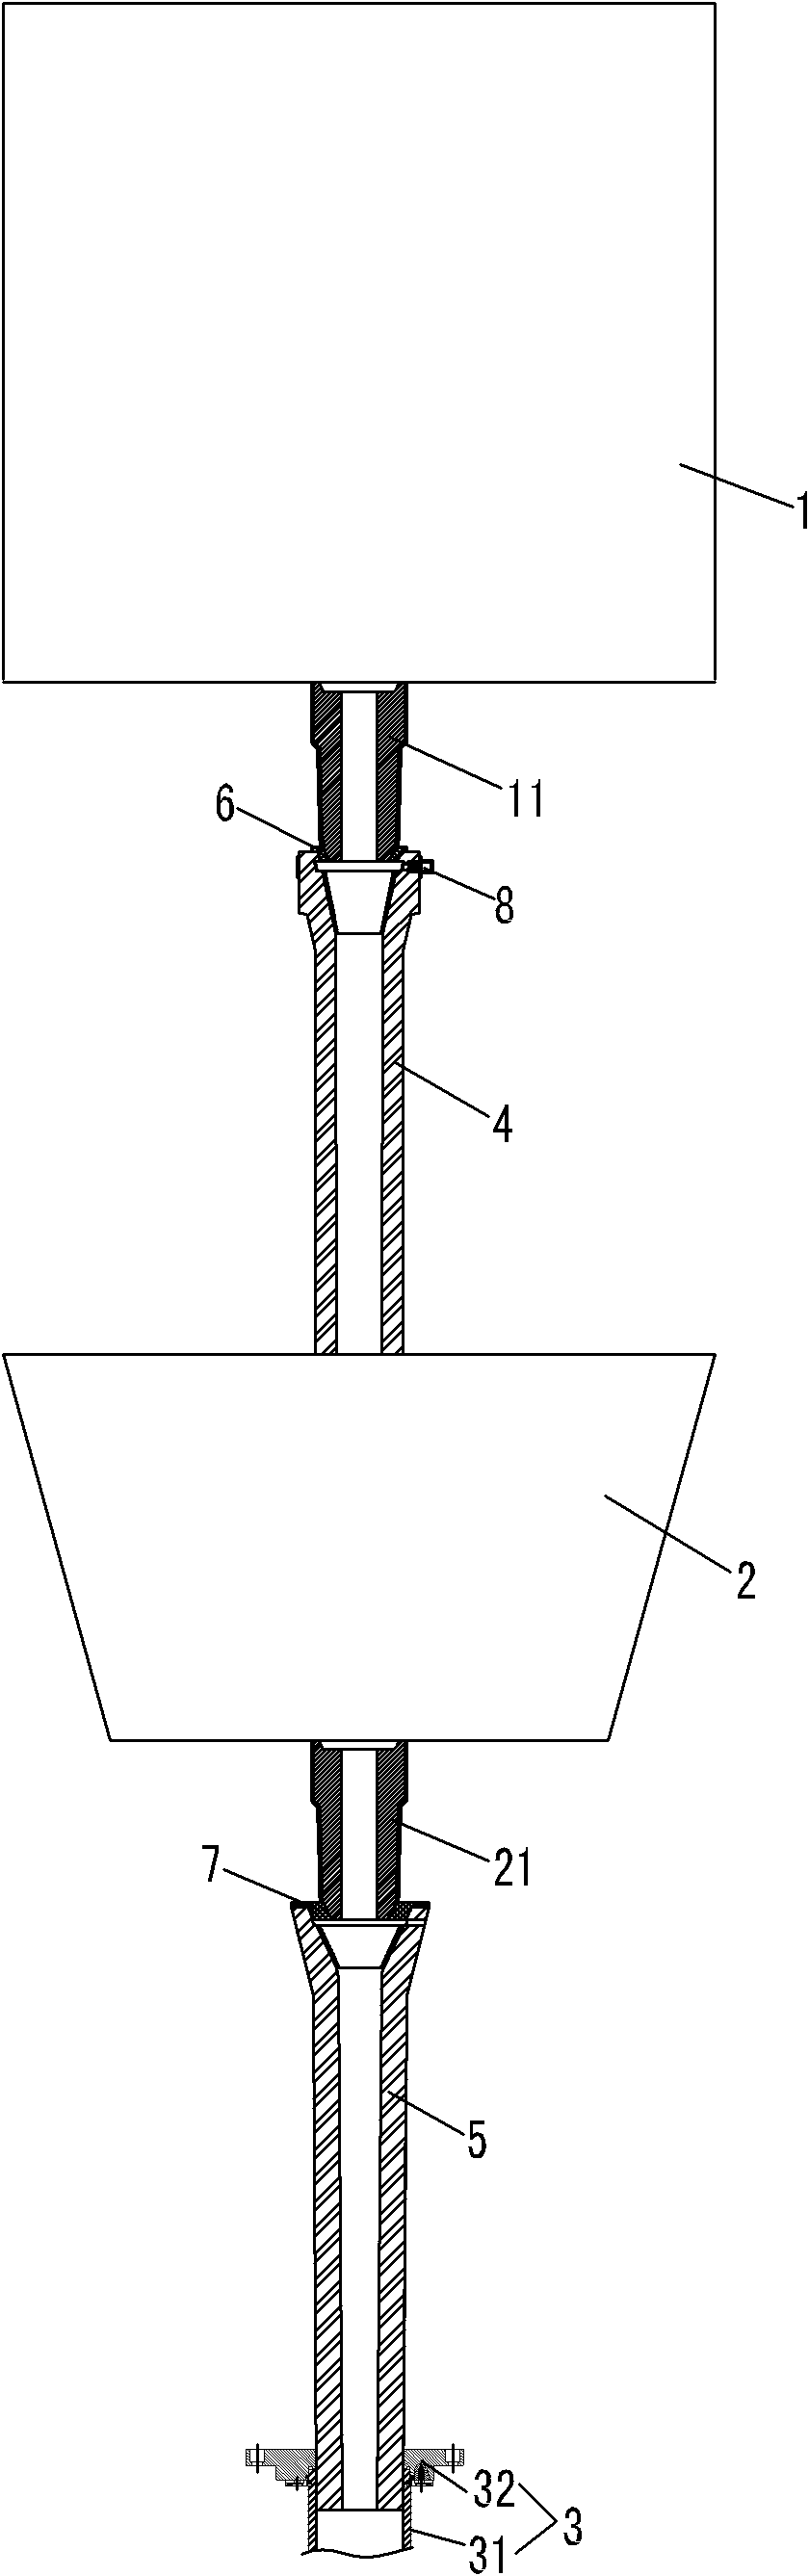 Continuous-casting sealed pouring device and technological method for protecting pouring using same